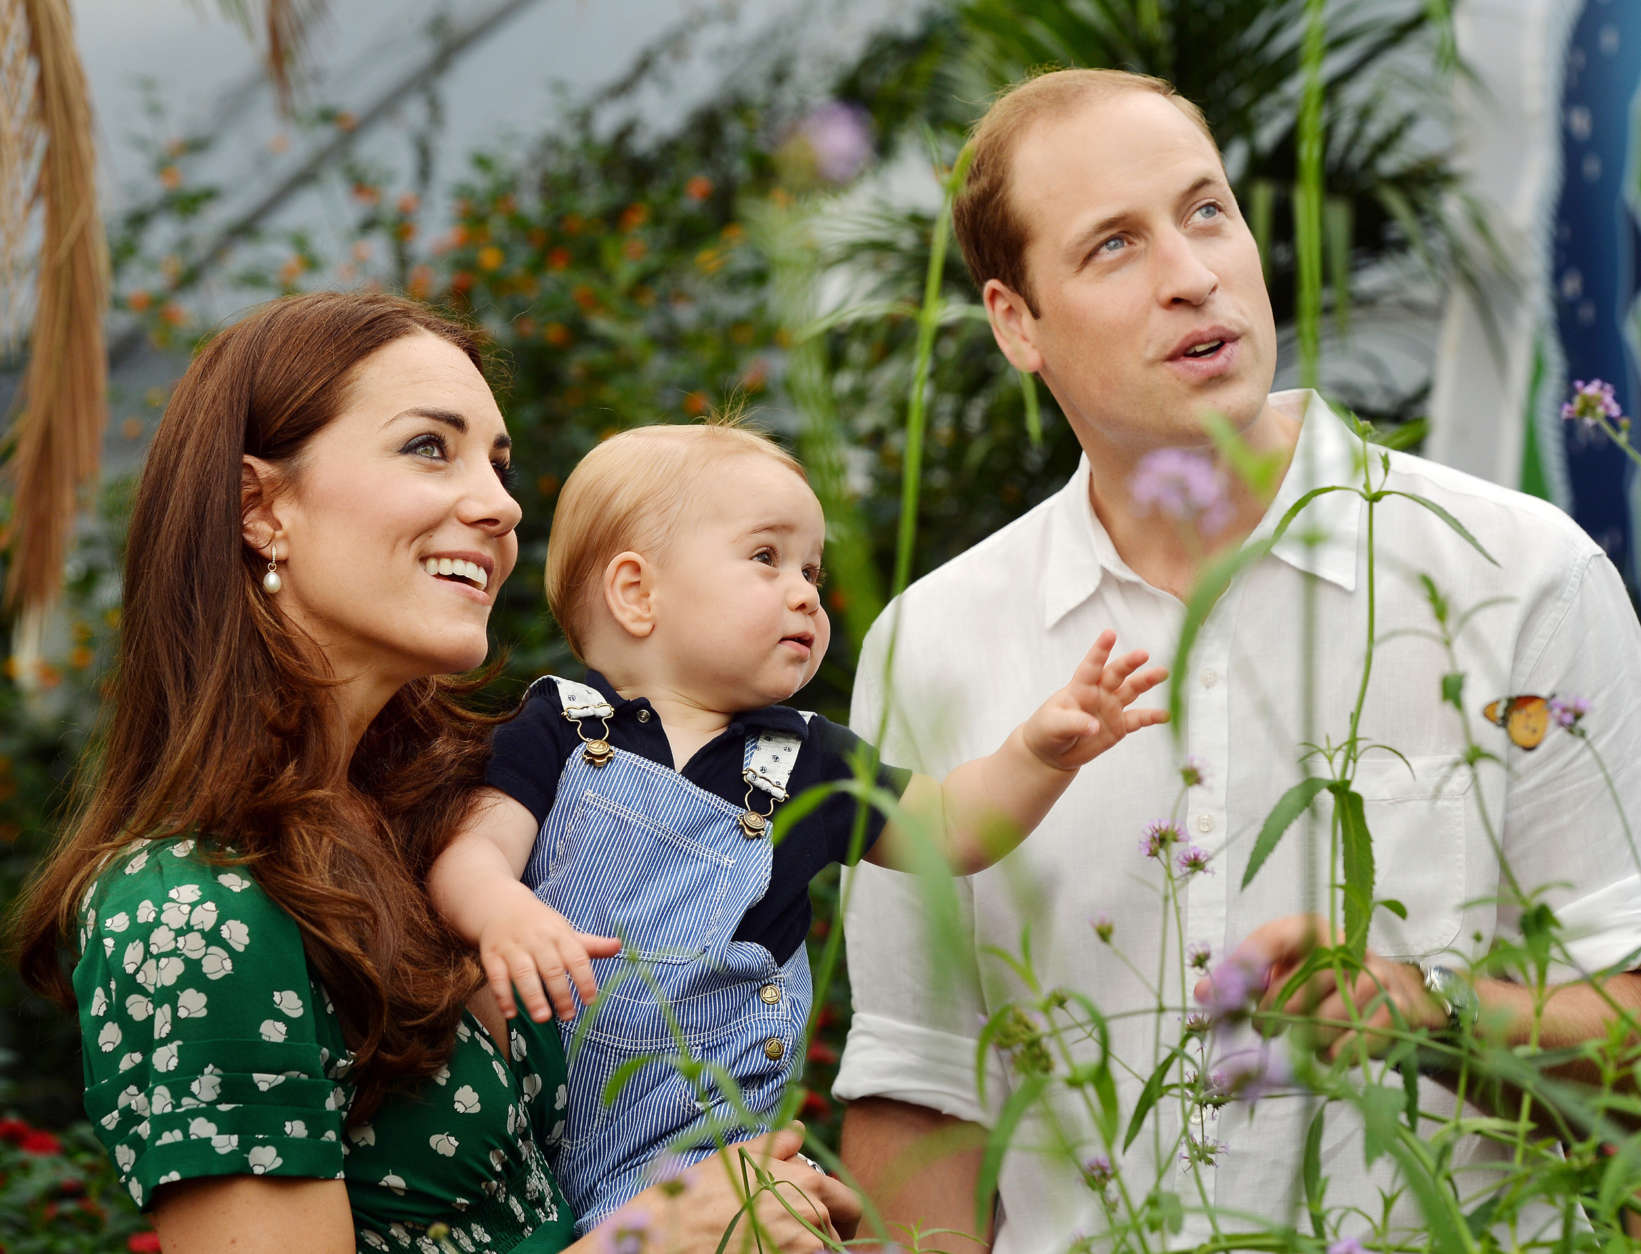 This July 2, 2014, file photo shows Britain's Prince William and Kate Duchess of Cambridge and Prince George during a visit to the Sensational Butterflies exhibition at the Natural History Museum, London.  (AP Photo/John Stillwell, File)